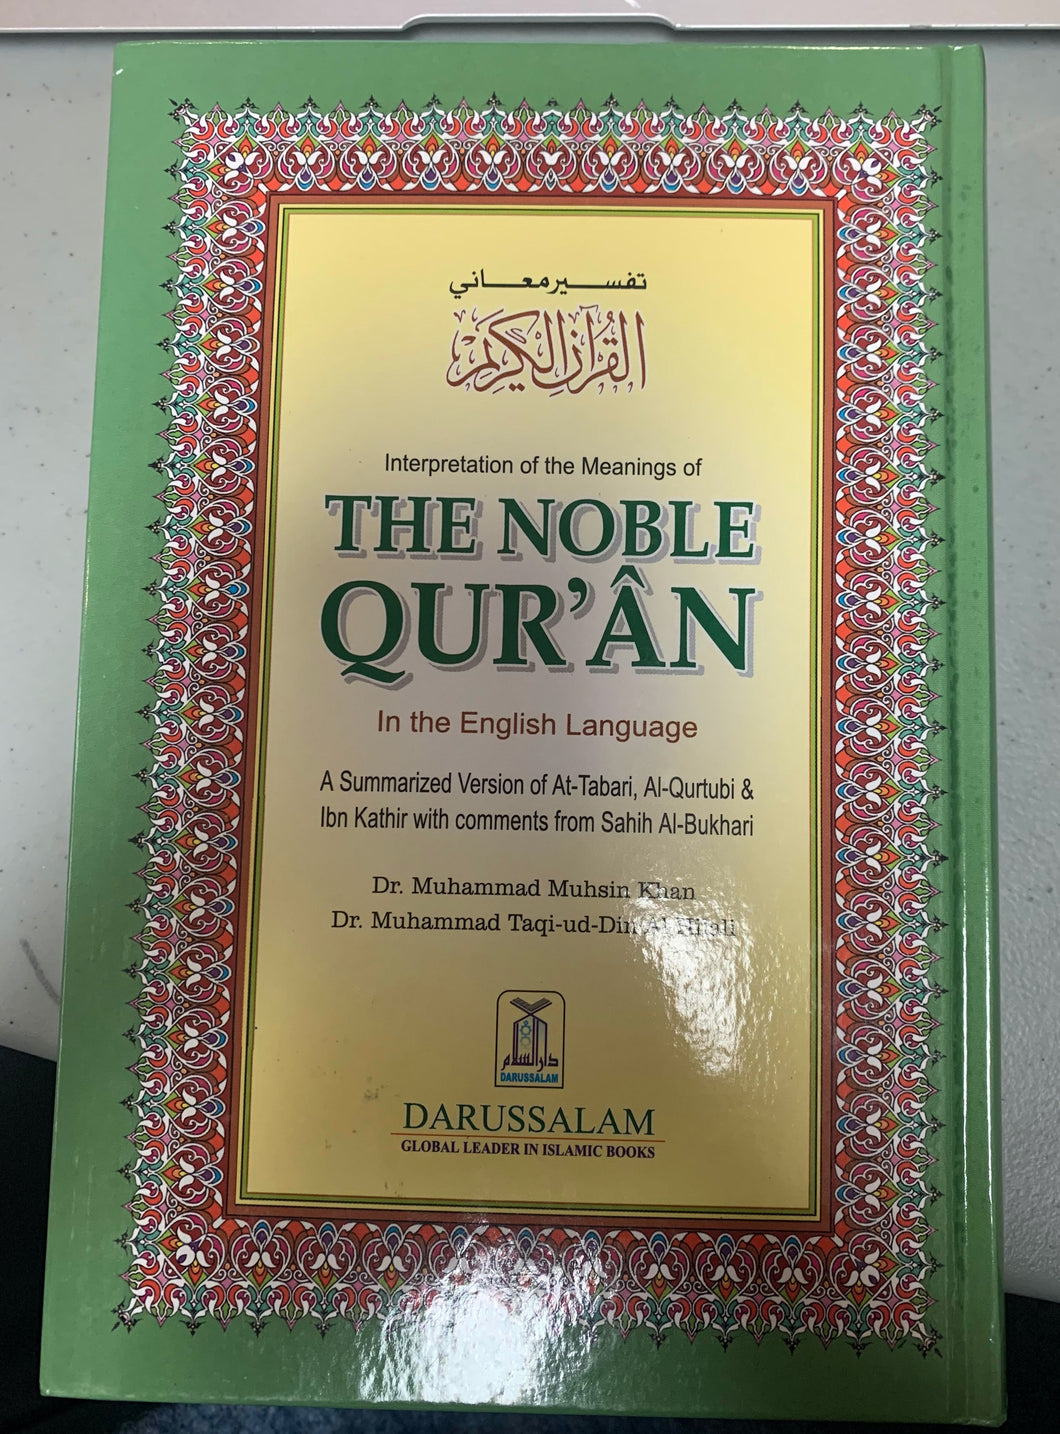 The Noble Quran (English language) (interpretation and meaning)